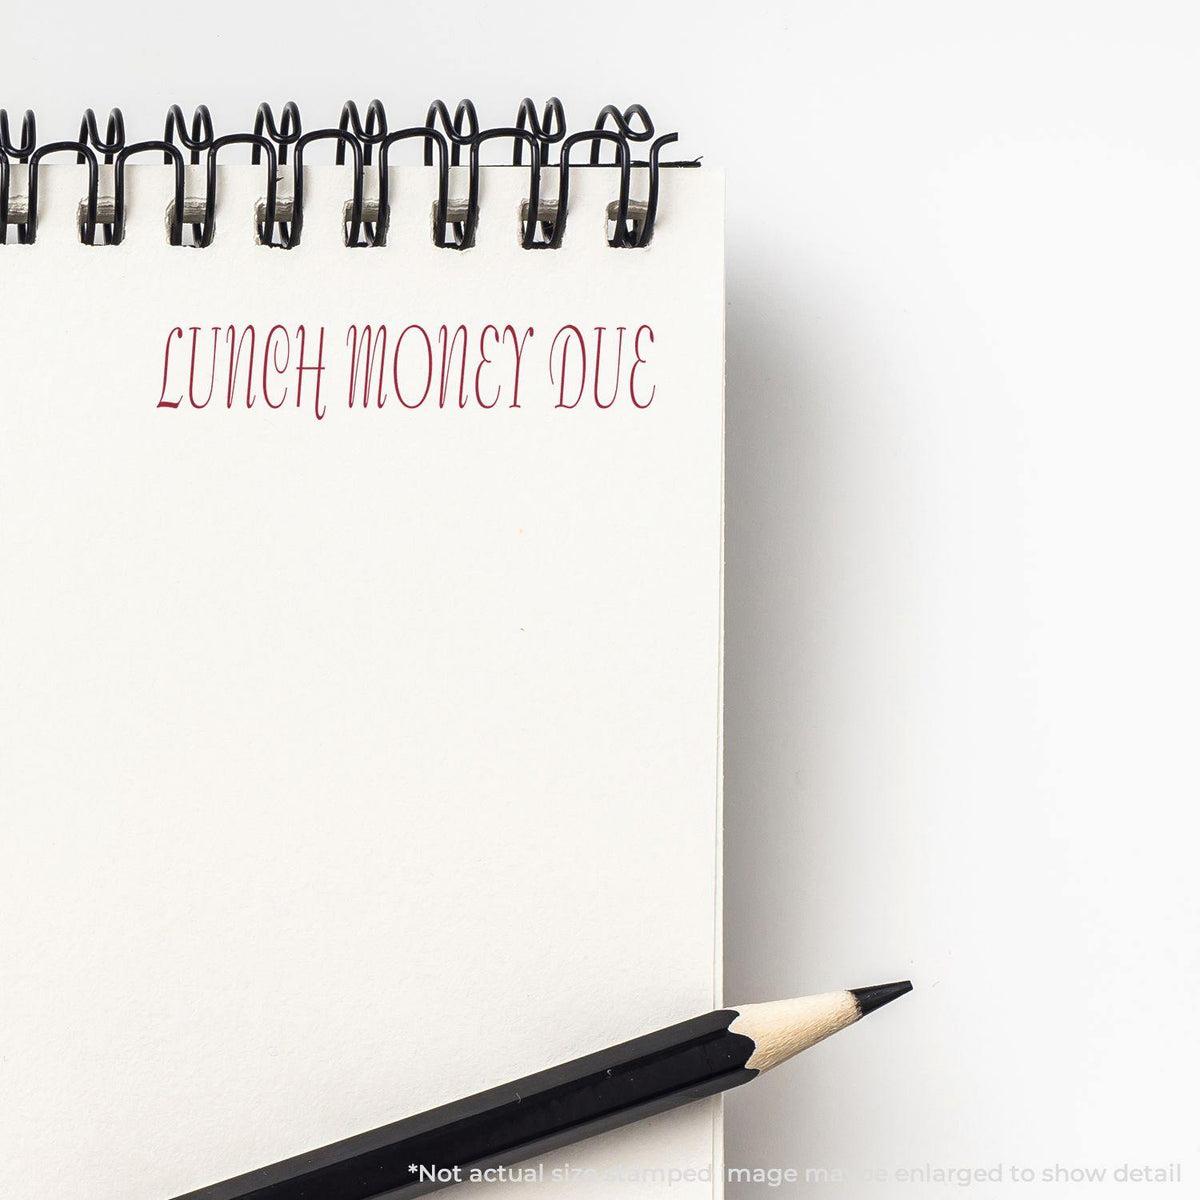 Large Lunch Money Due Rubber Stamp In Use Photo